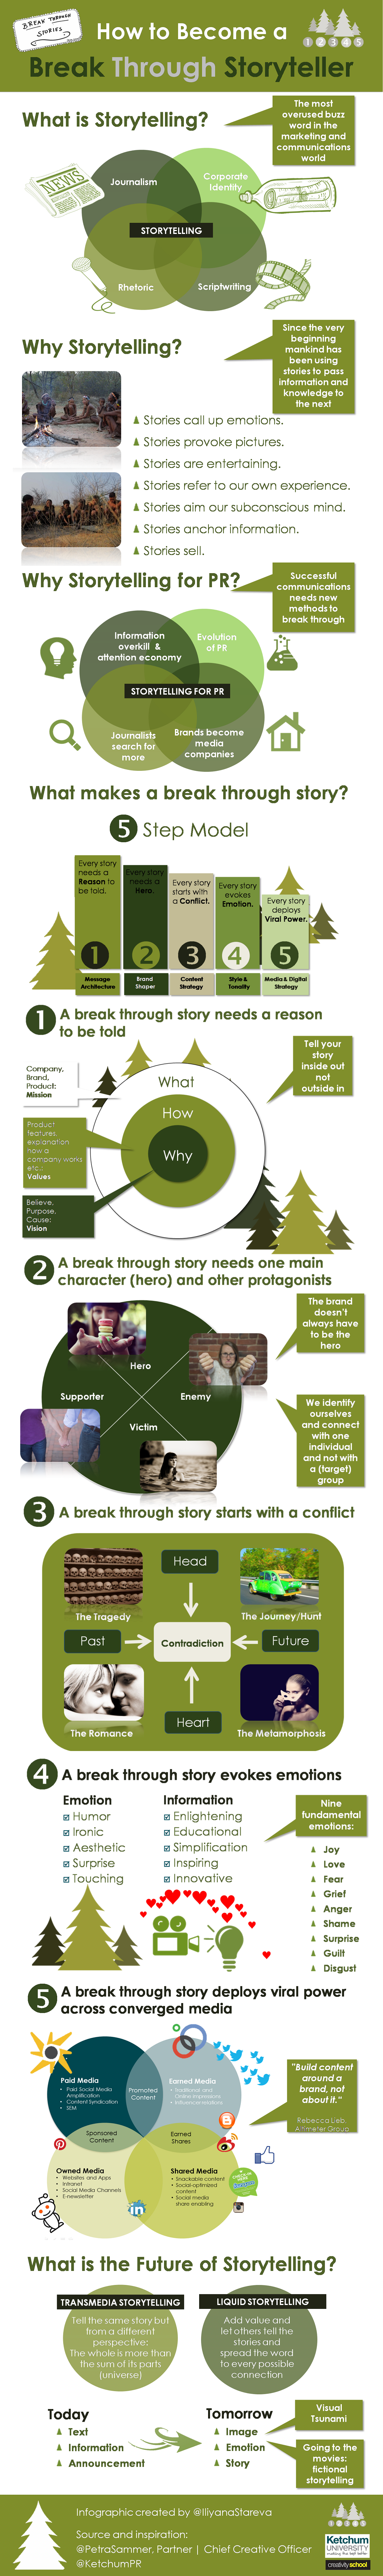 How-to-become-a-break-through-storyteller-infographic.png